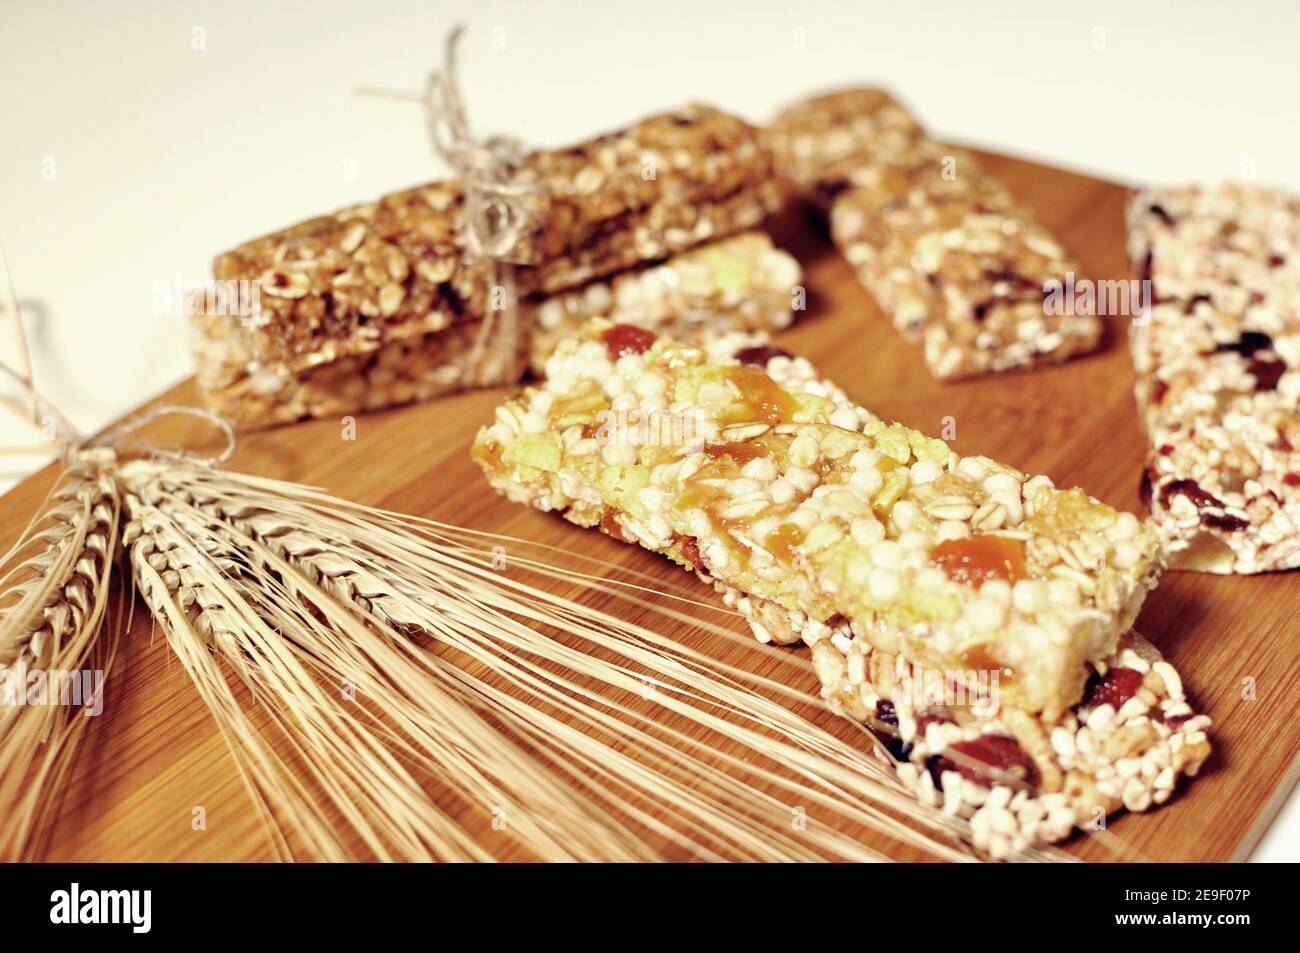 Bars of healthy cereal sweet snacks on wooden board. Top dish Stock Photo